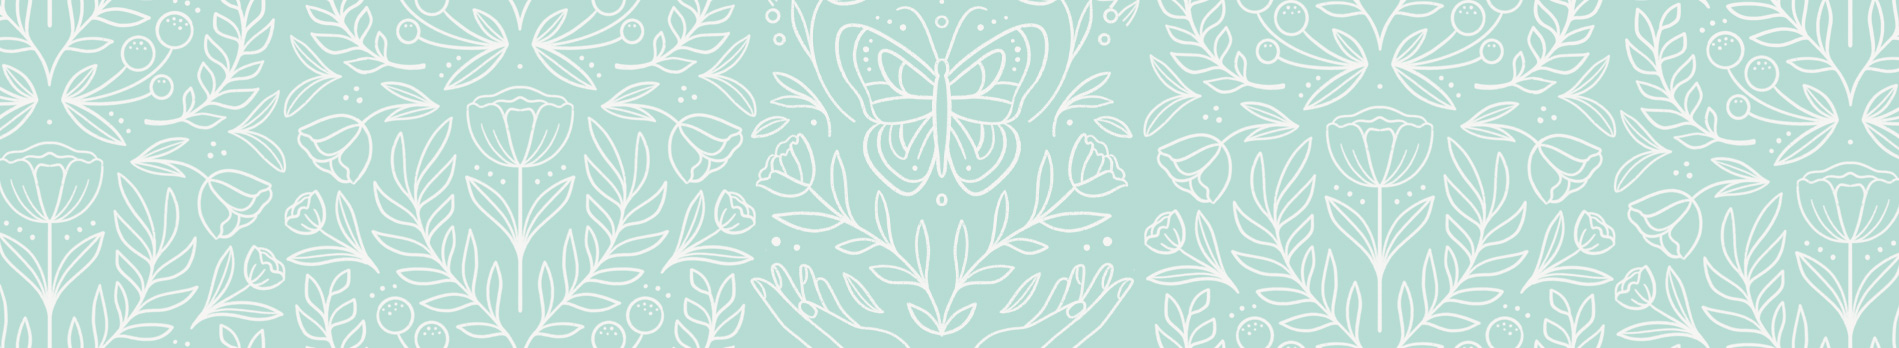 A repeated pattern line drawing of butterflies and flowers on an aqua background.